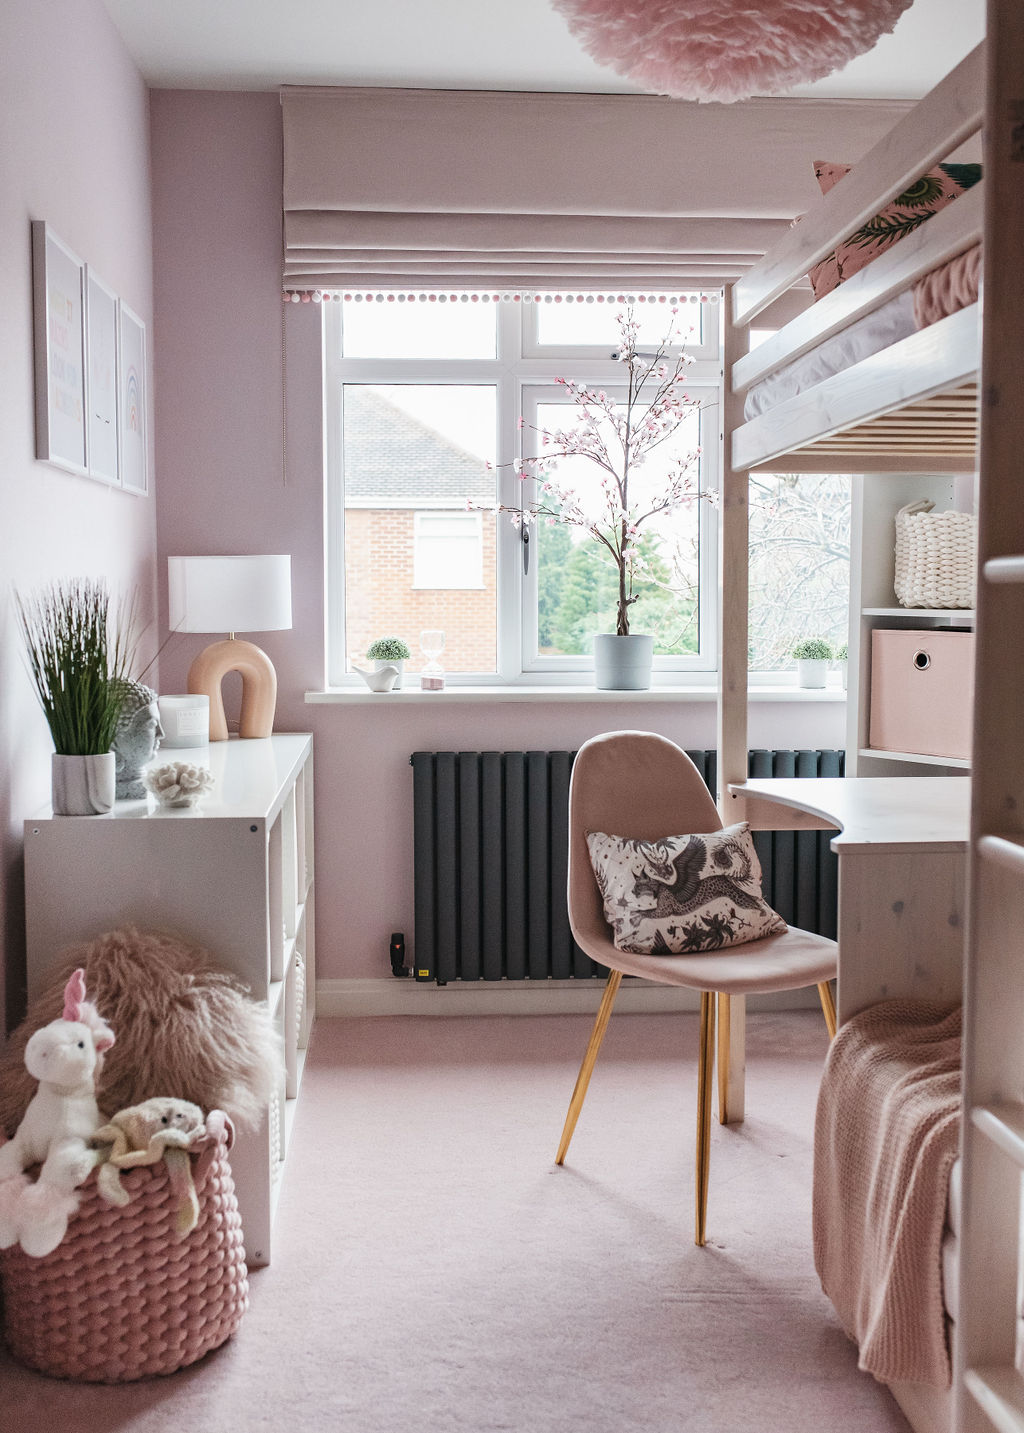 interior of a girls bedroom with pink walls and carpet